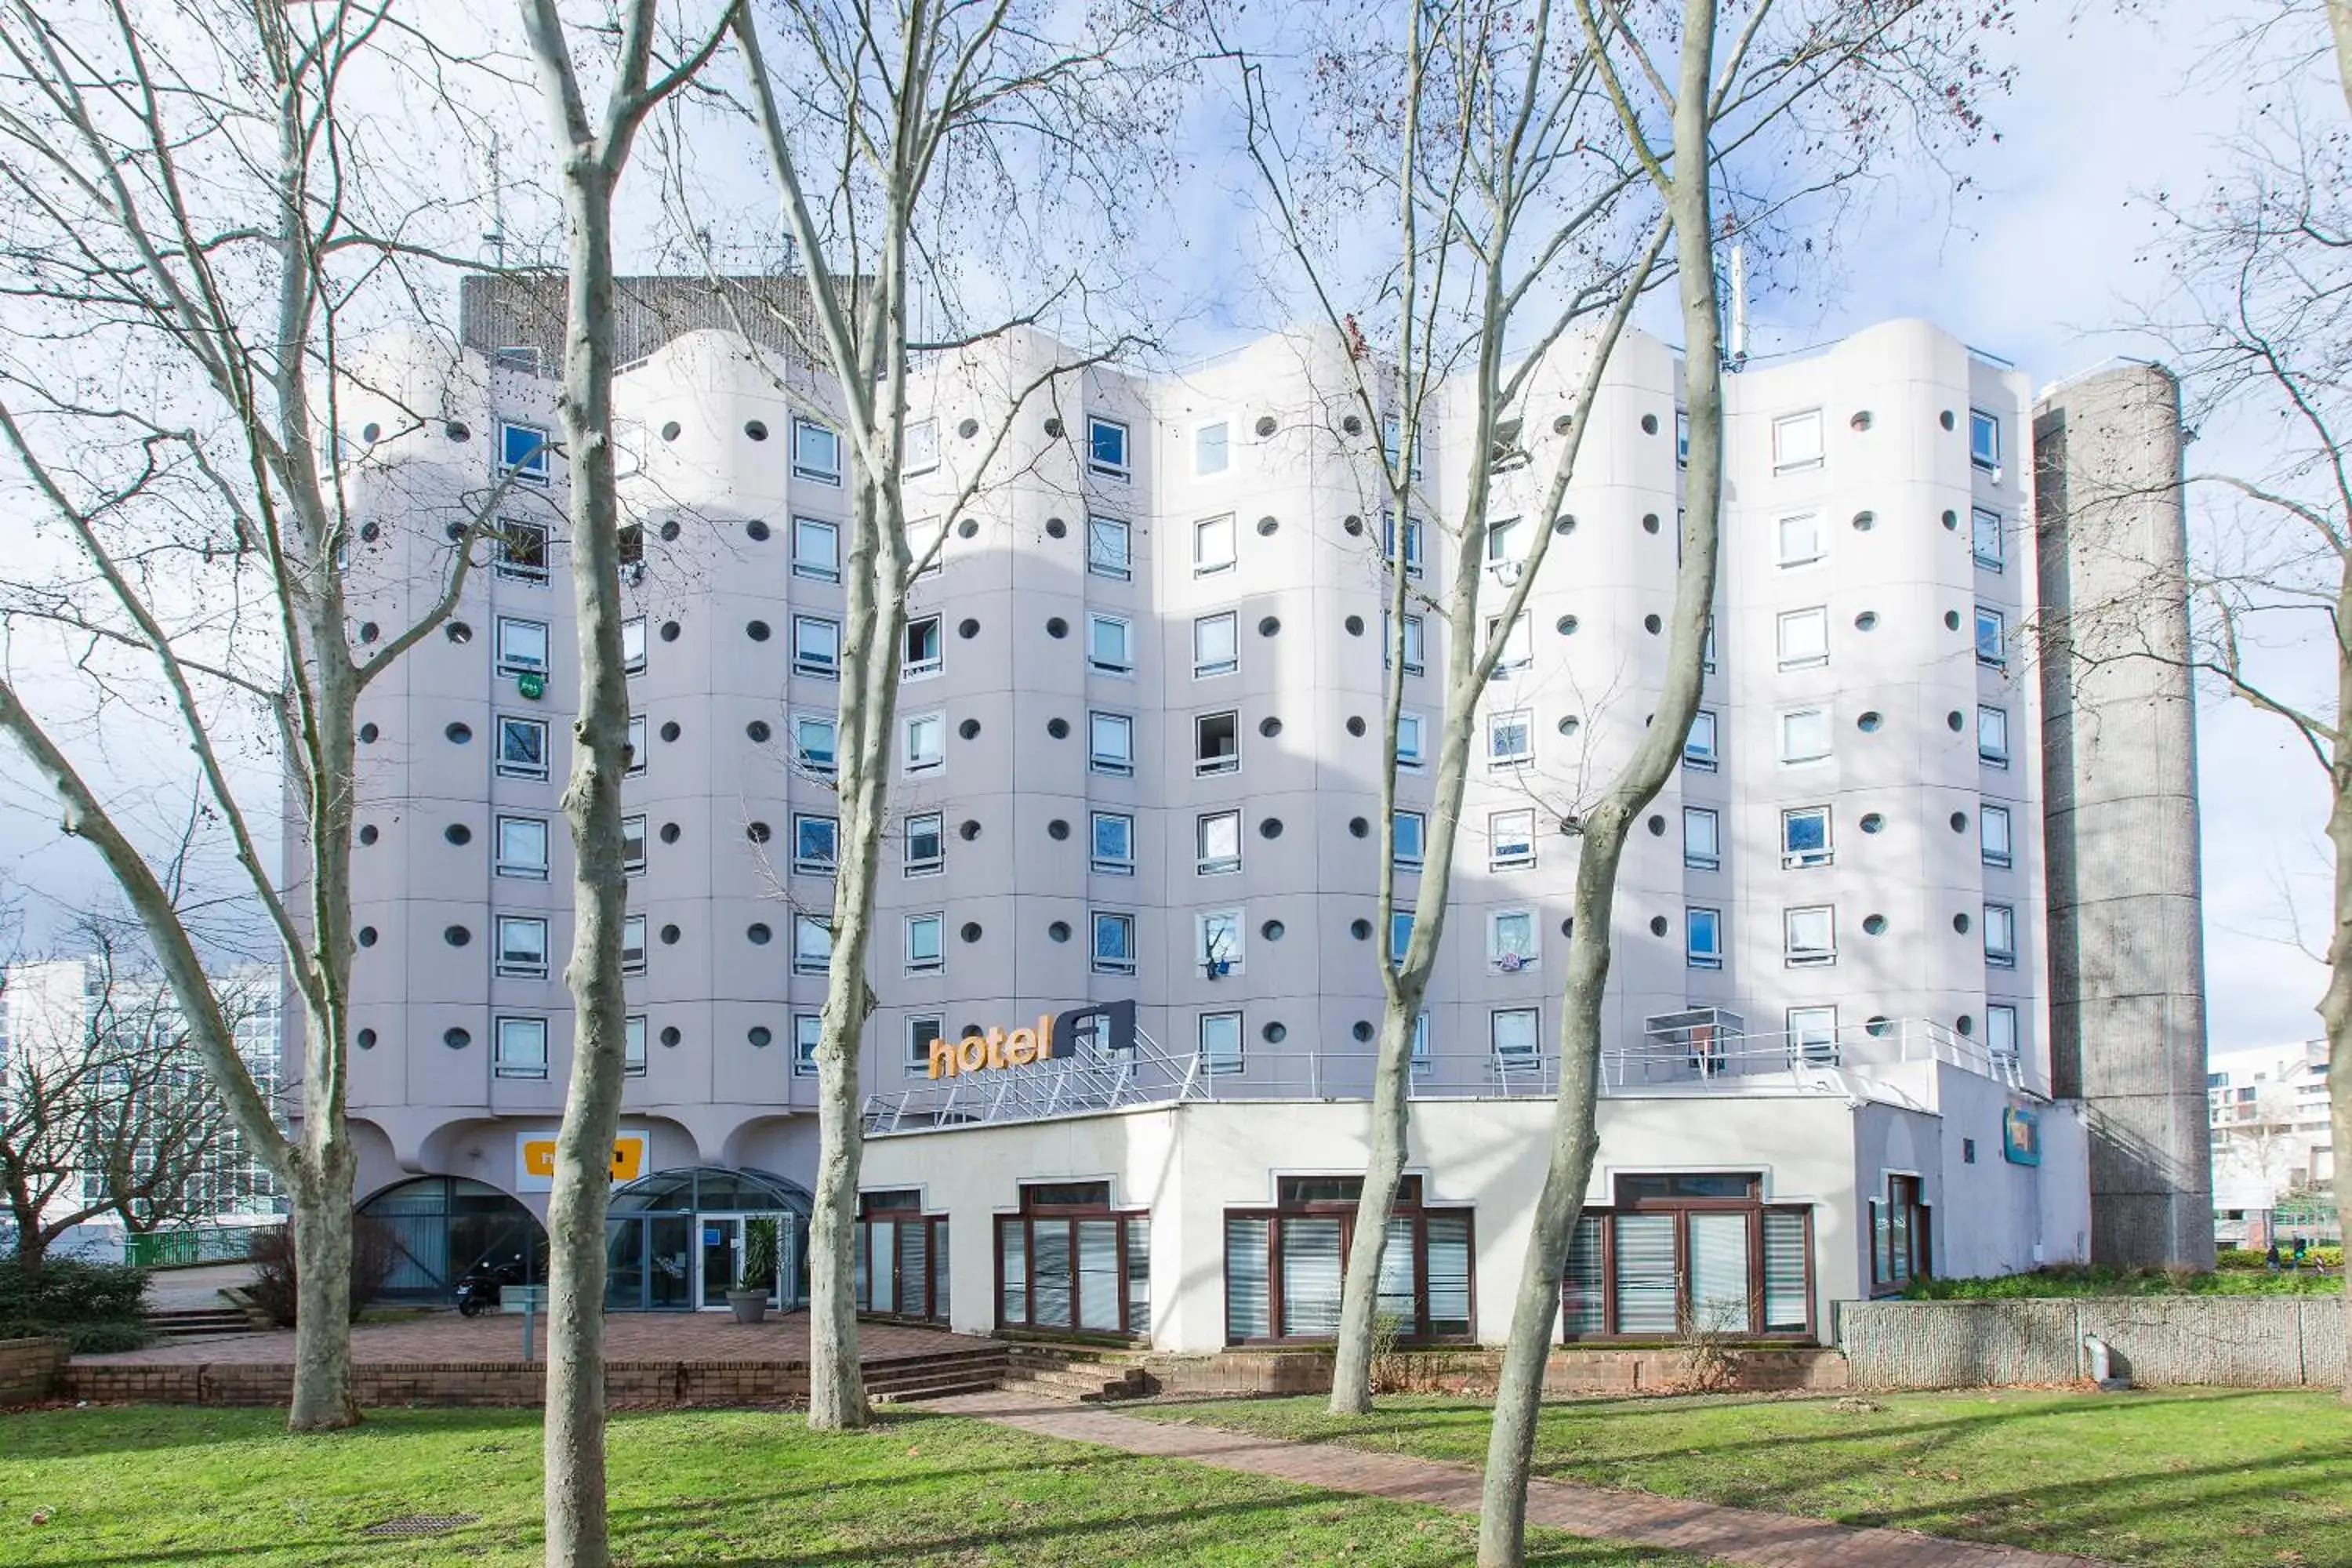 Property Building in hotelF1 Cergy